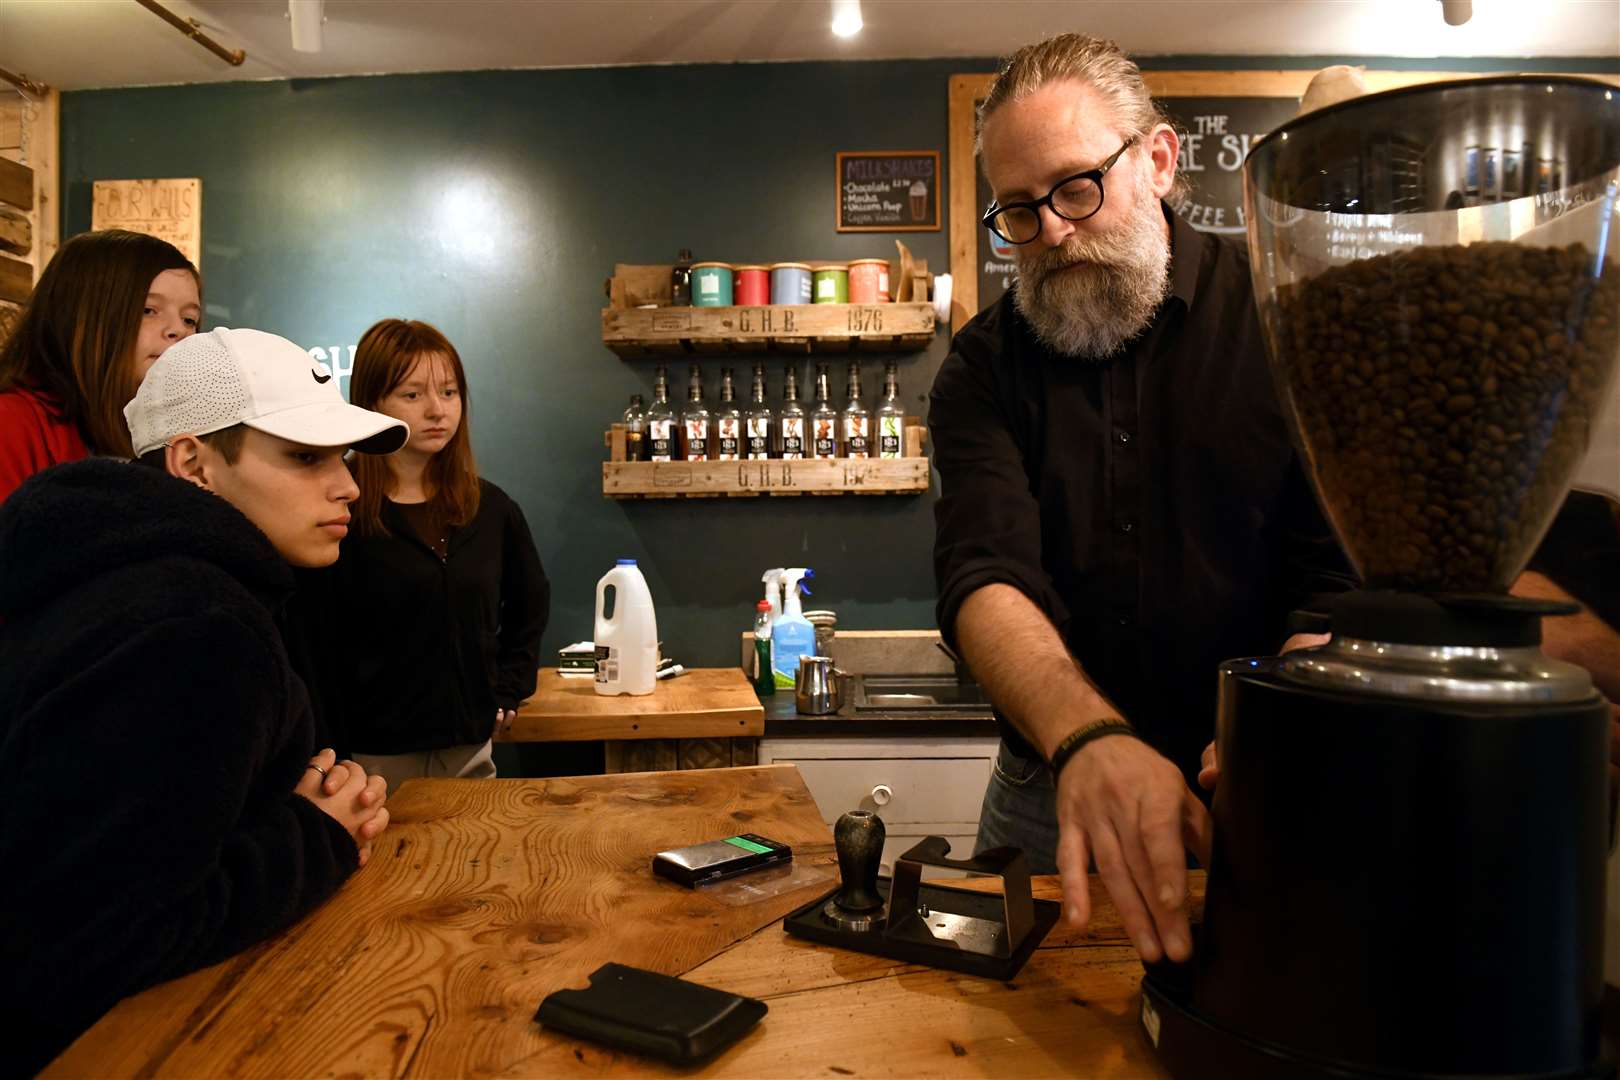 JD teaches the art of being barista at the Bike Shed in Merkinch.